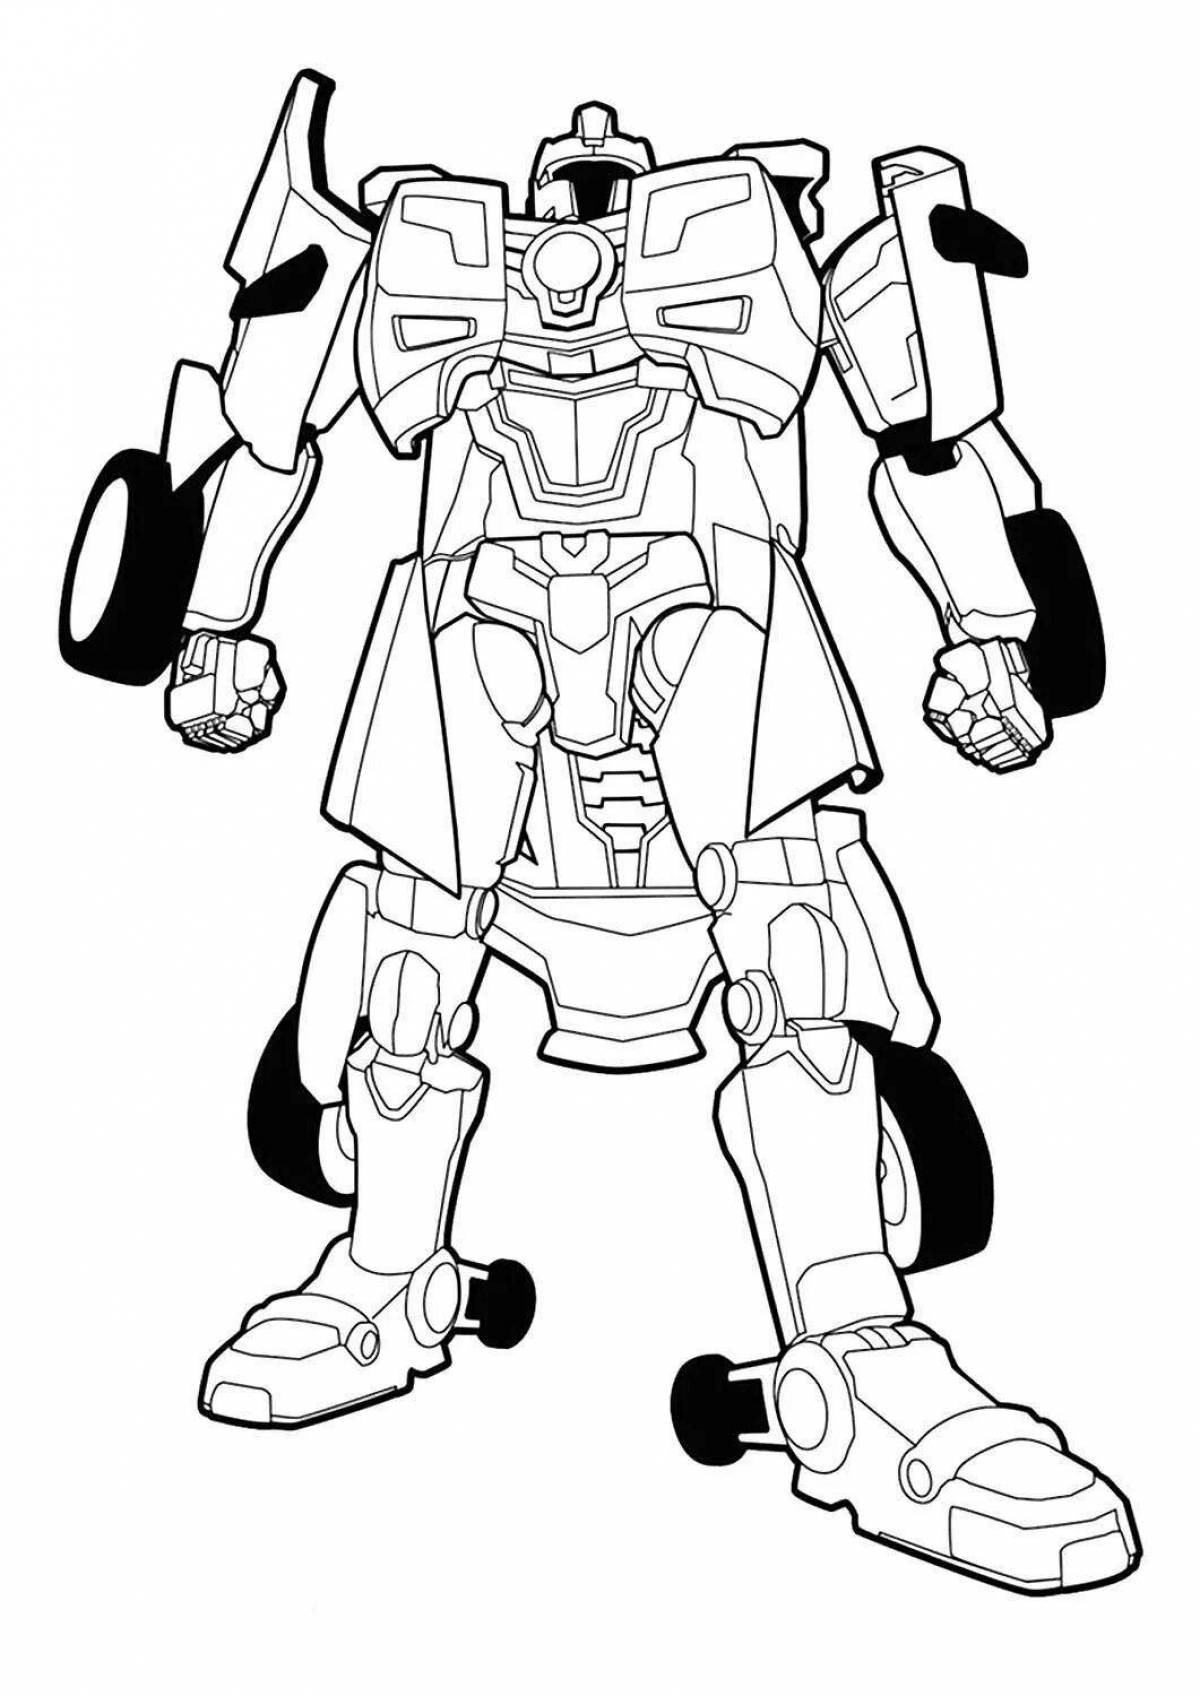 Color-lively tobot x coloring page